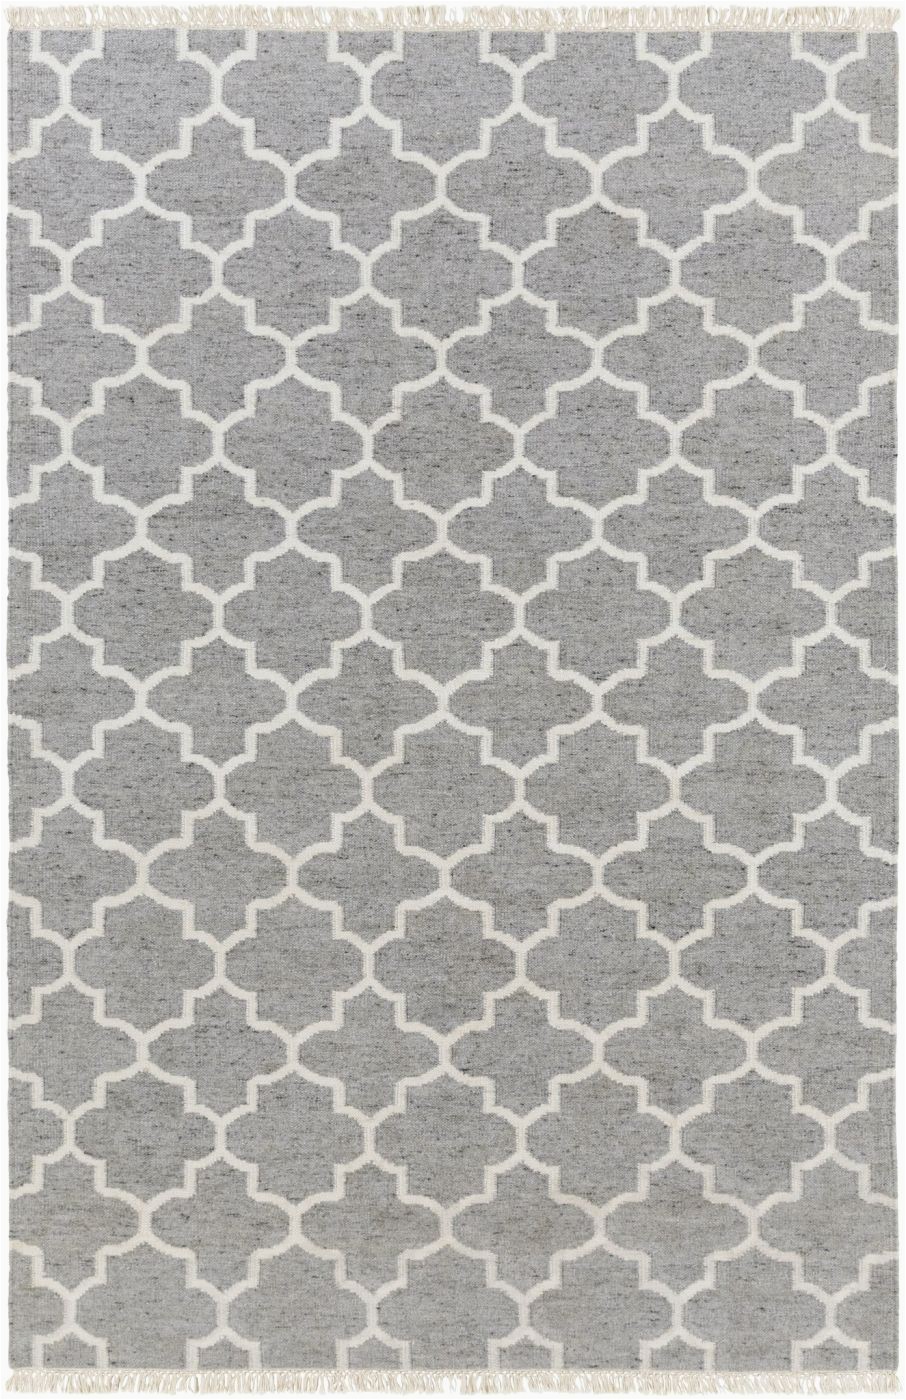 Somerset Home Geometric area Rug Grey and White Surya Blowout Sale Up to Off isl3003 23 isle Geometric area Rug Gray Neutral Only Ly $72 00 at Contemporary Furniture Warehouse